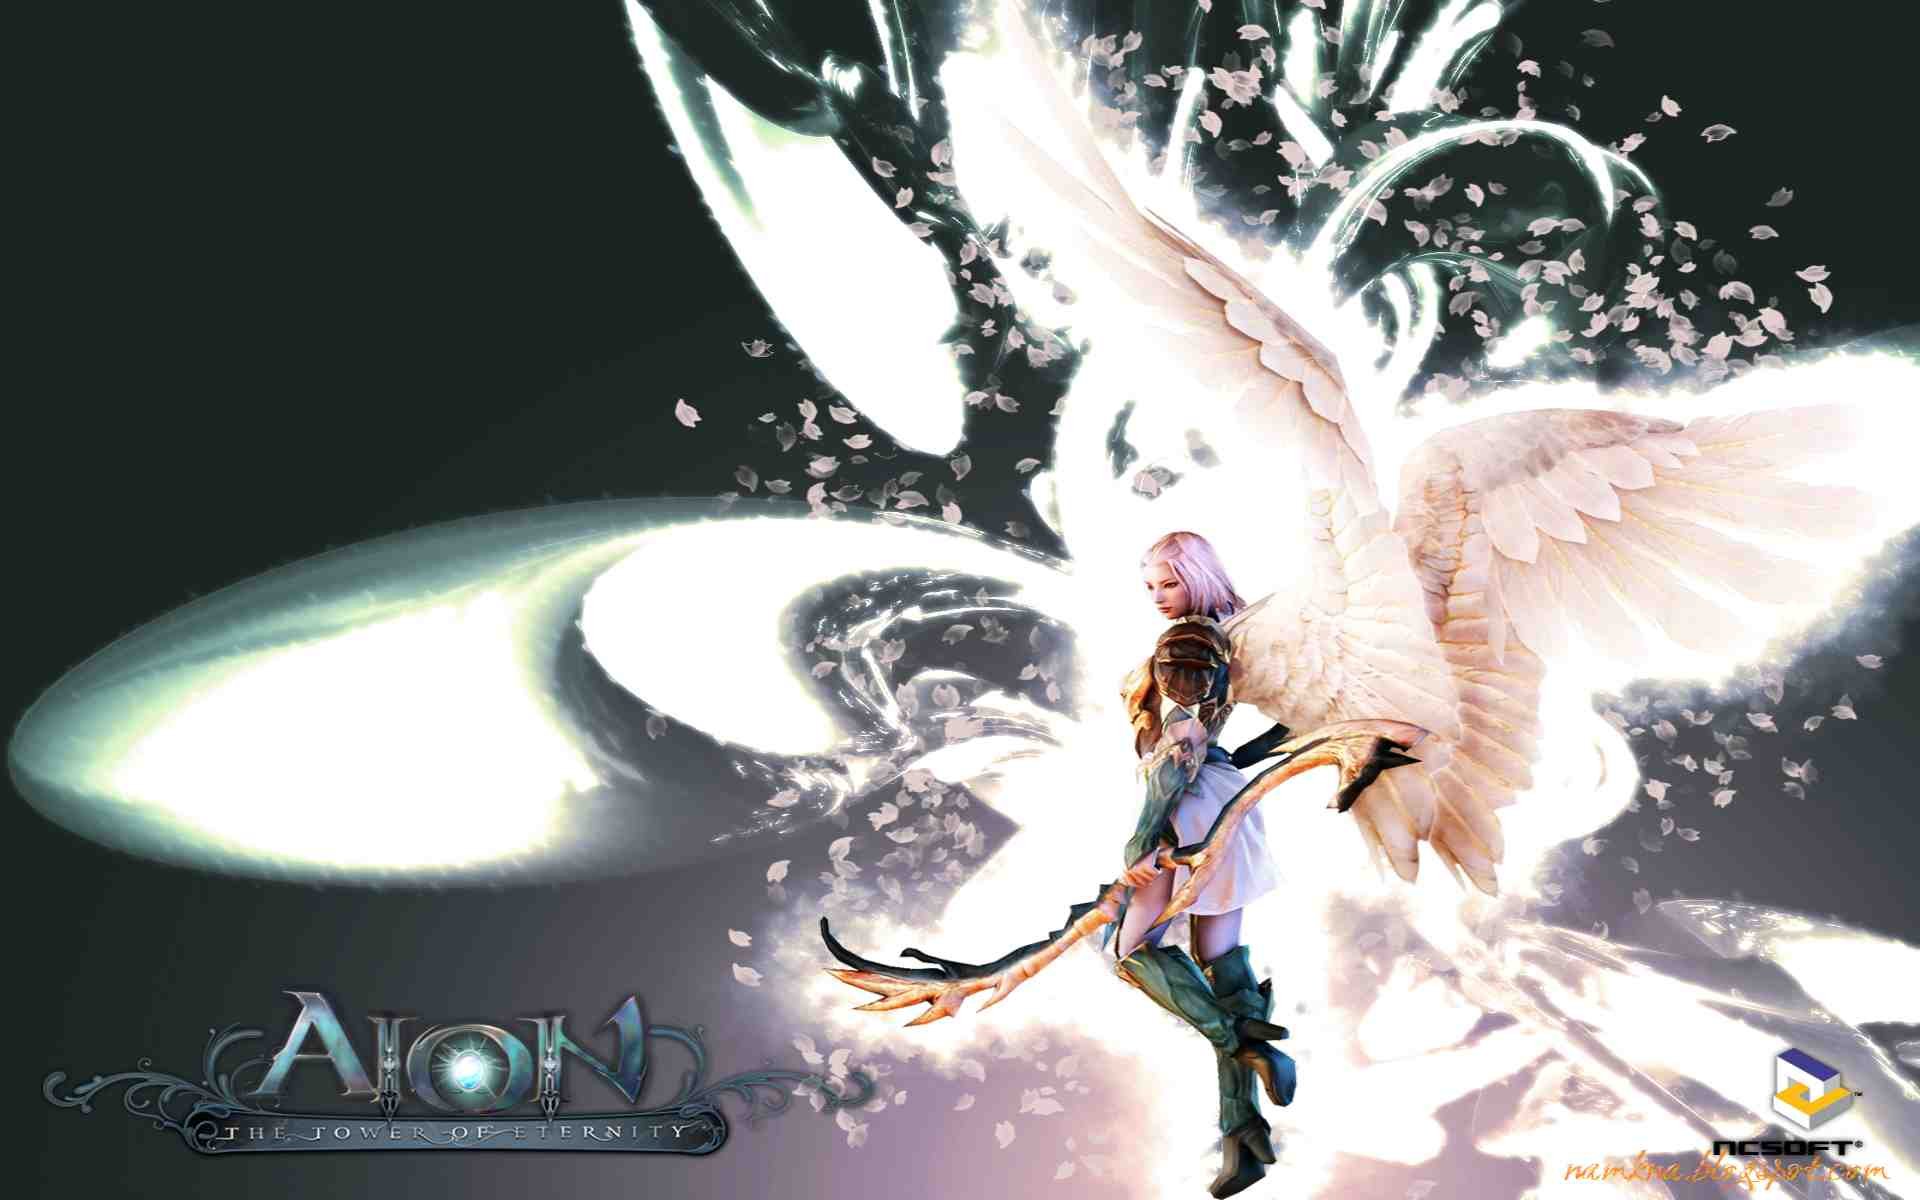 aion, Game, Video, Fantasy, Art, Artwork, Mmo, Online, Action, Fighting, Ascension, Rpg, Echoes, Eternity, Upheaval, Warrior, Magic, Perfect Wallpaper